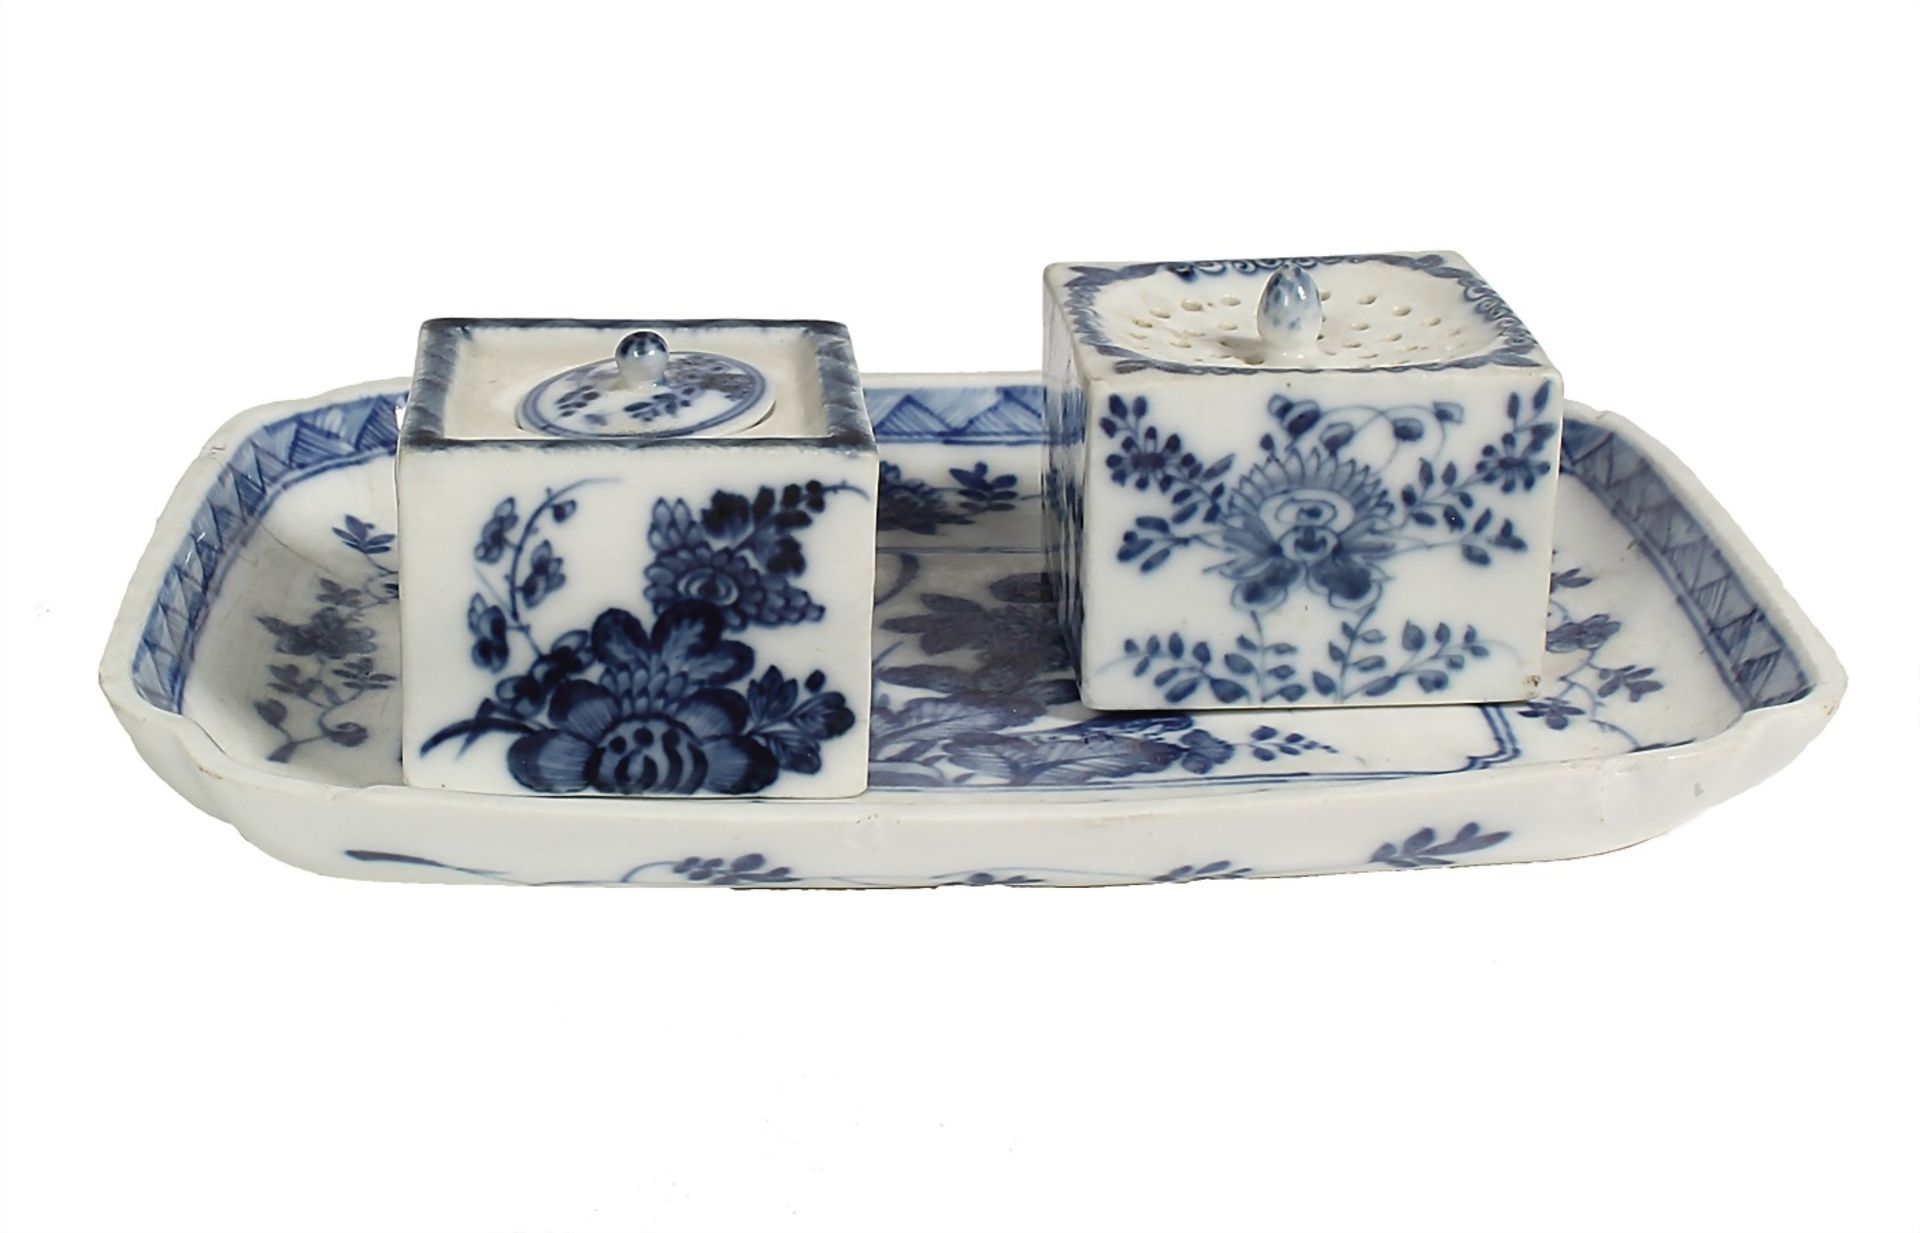 tray with spice jars, painted, signed MEISSEN (swords), tray 1850-1924 with flaked off parts 20.1